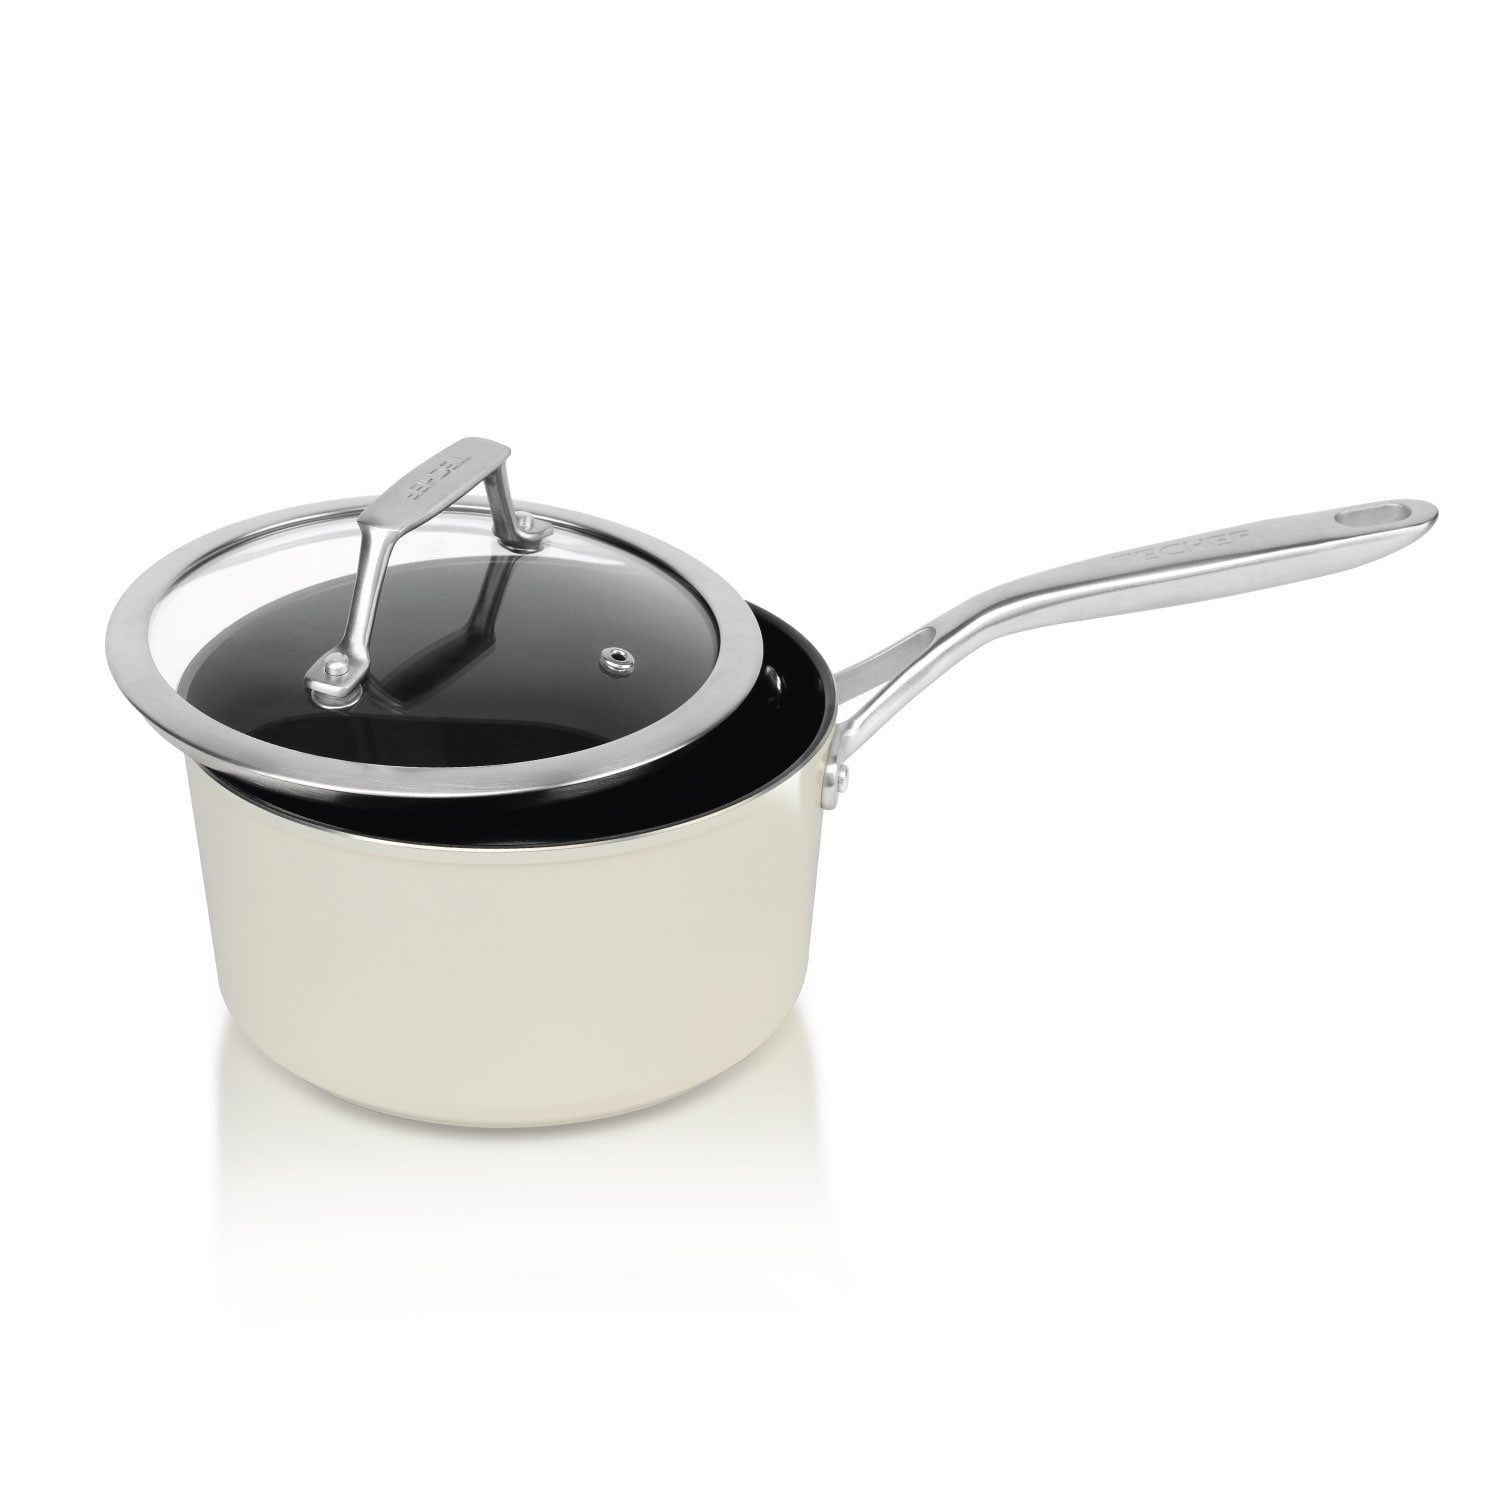 https://ak1.ostkcdn.com/images/products/is/images/direct/f668c60f4ae06d9a2c6bd70a364348c091435b86/TECHEF-ValenCera---2-Quart-Saucepan-with-Cover.jpg